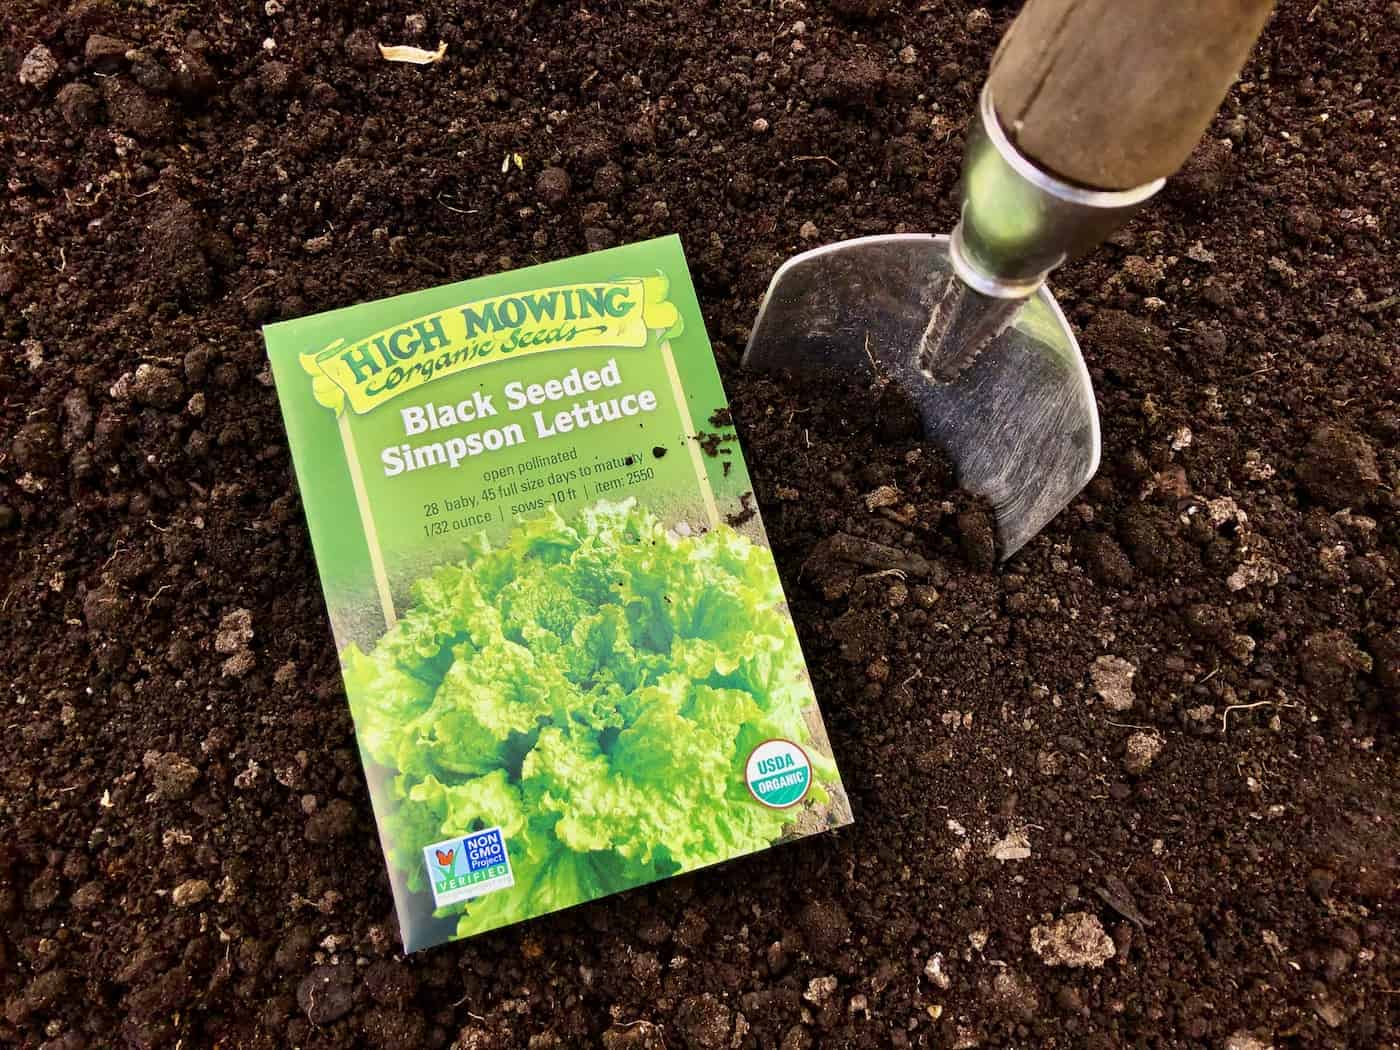 High mowing seed packet on garden soil with trowel